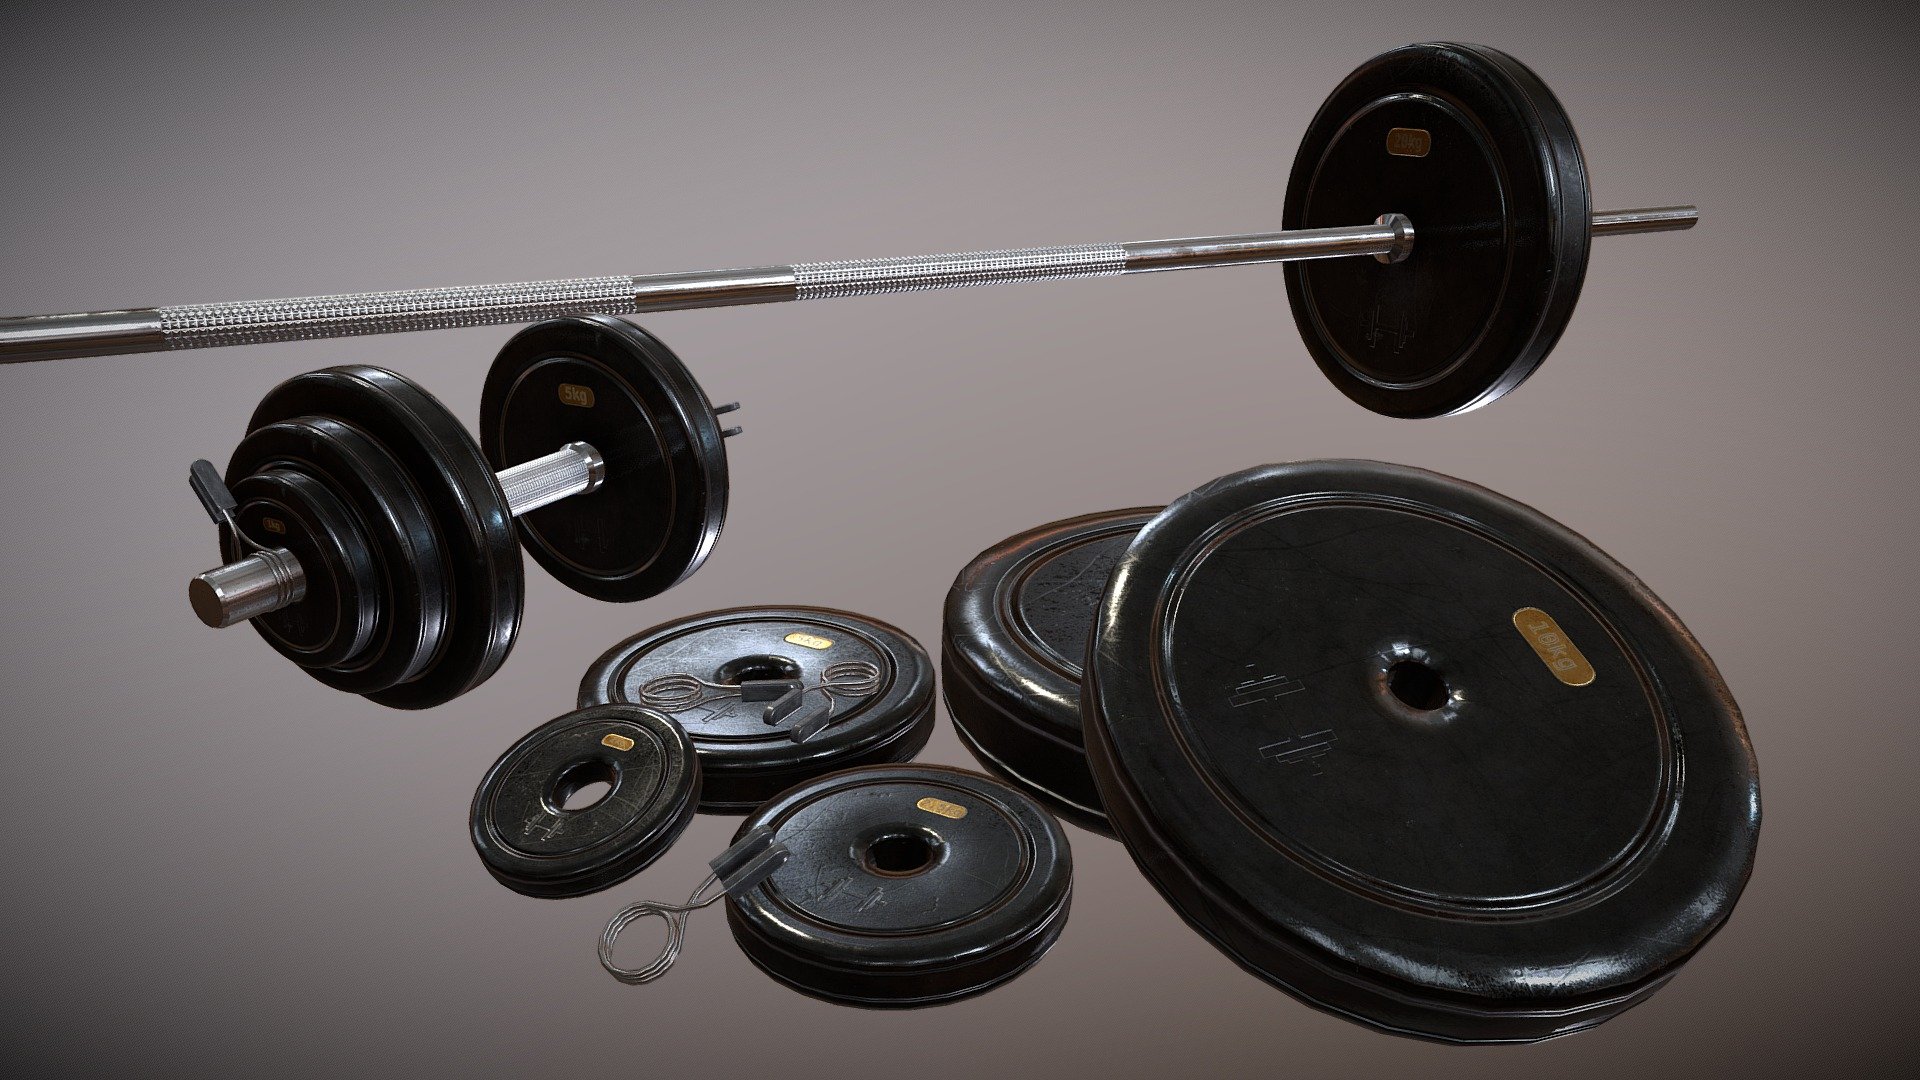 These dumbbells are made in a modular way.

The weights come in 1kg, 2.5kg, 5kg, 10kg and 20kg and they all fit on both bars. 

The clamps fit on both bars as well.

The clamps and weights on the ground are unsubdivided on purpose.

The textures have been baked for each object in order to optimize rendering times.

Weights unsubdivided (each):

1024 tris

512 verts

512 faces

Weights subdivided (each):

4096 tris

2048 verts

2048 faces

Grip short:

384 tris

386 verts

208 faces

Grip long:

448 tris

226 verts

240 faces

Clamps unsubdivided (each):

884 tris

450 verts

454 faces

Clamps subdivided (each):

3584 tris

1804 verts

1792 faces

The original textures (CC0) used came from the following websites:

https://cc0textures.com and https://www.cgbookcase.com - Modular Dumbbell Set - Buy Royalty Free 3D model by blenderbirb 3d model